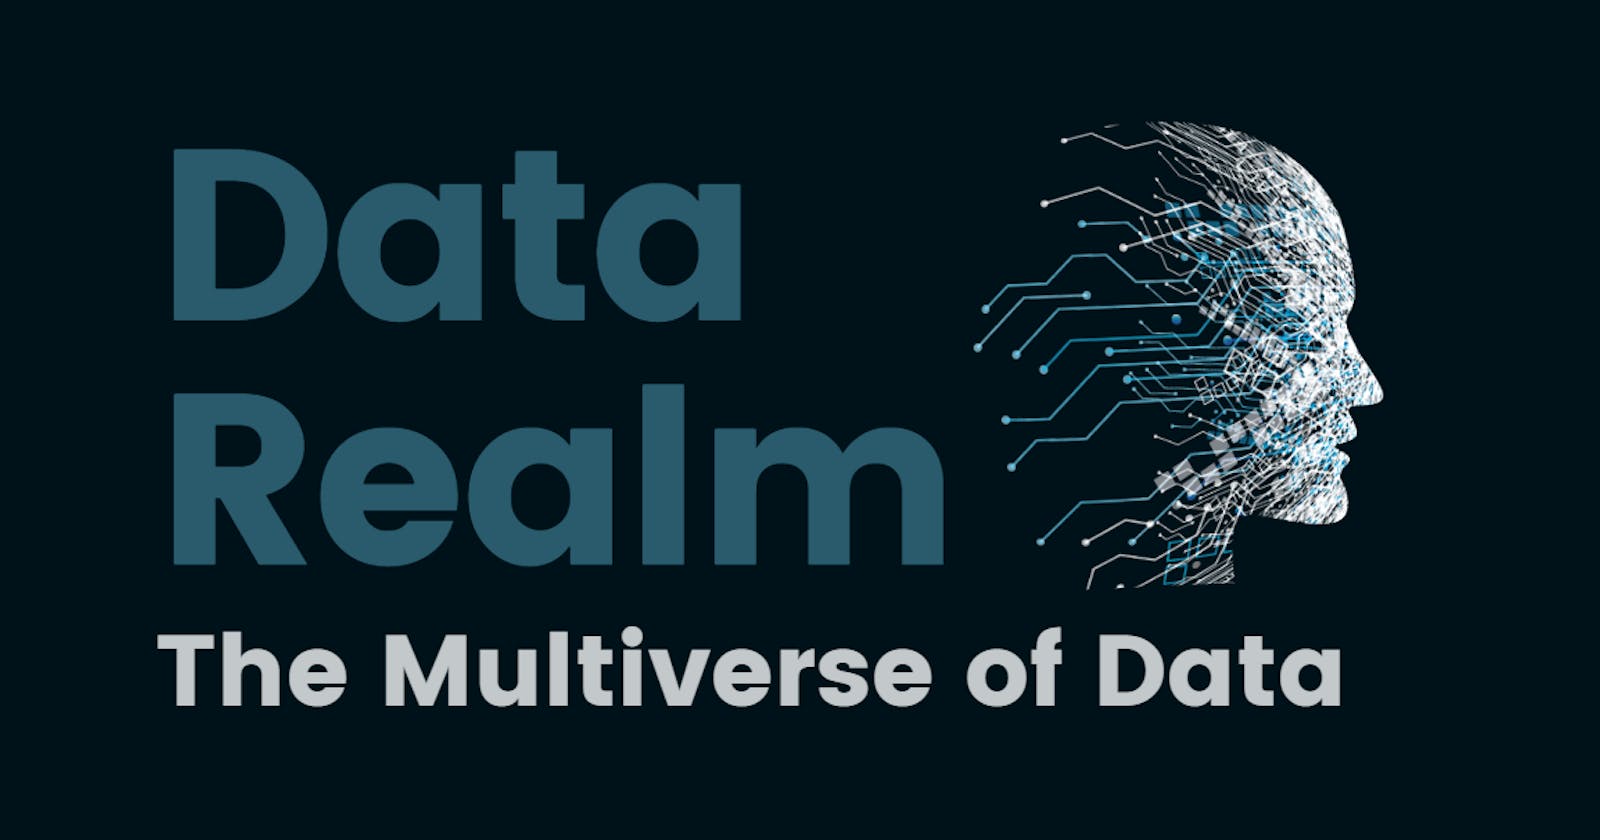 Data Science: The Multiverse